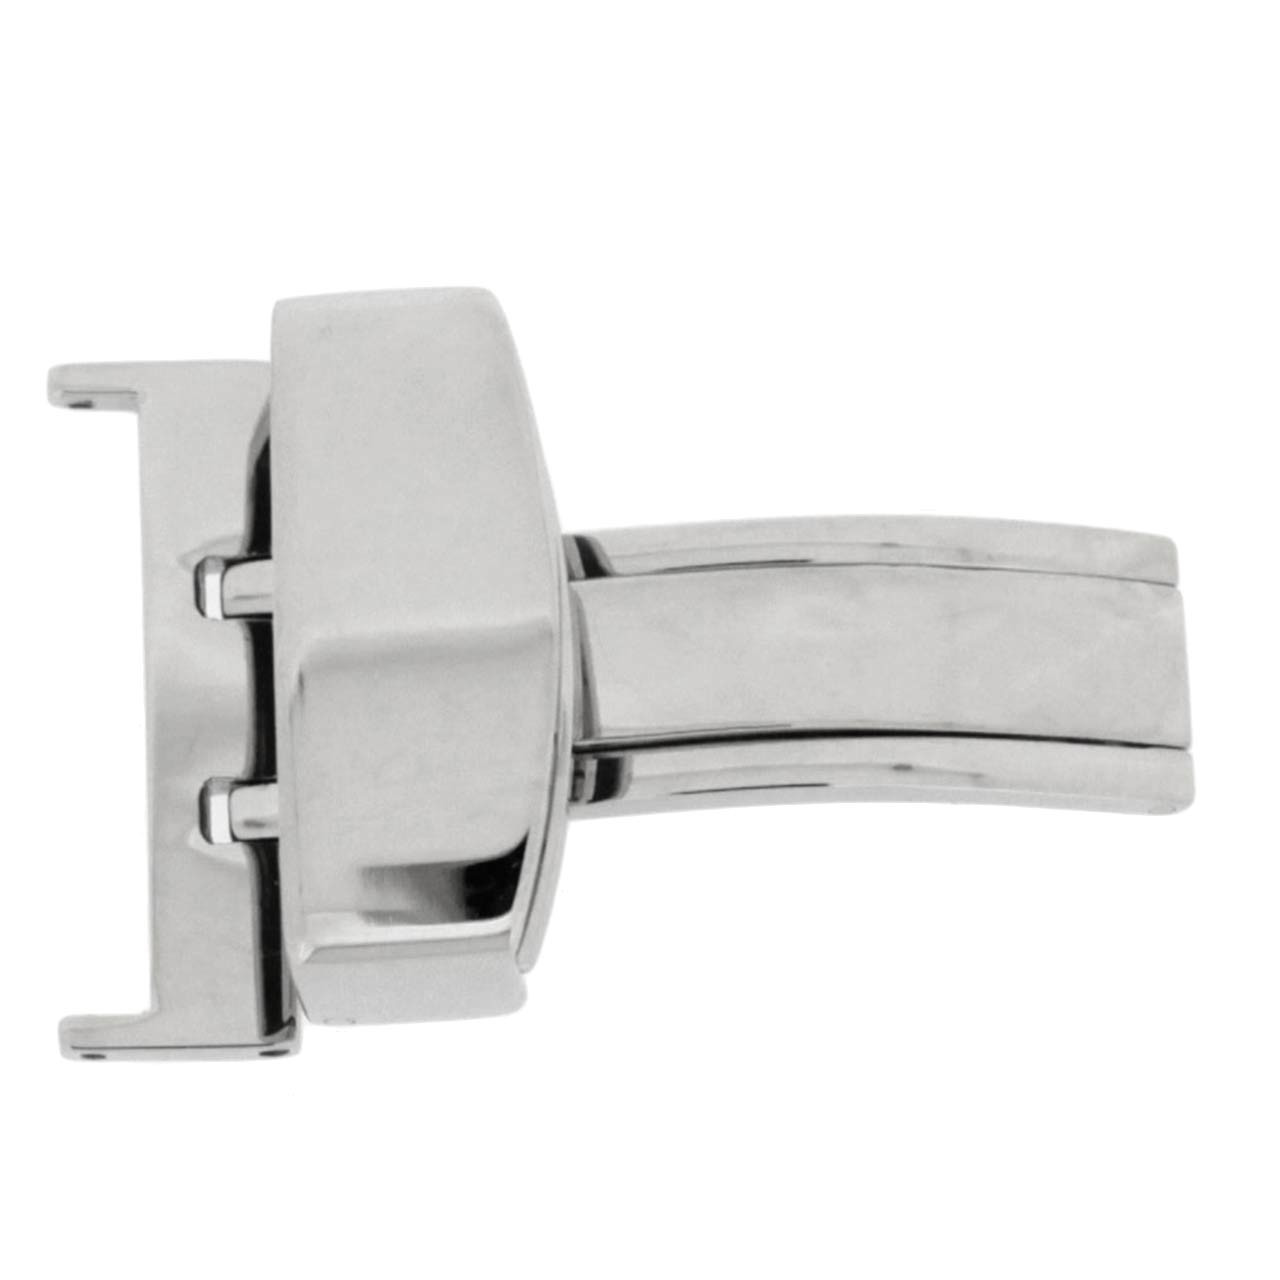 Stainless Steel Deployment Buckle Watch Material Parts & Repair Top View